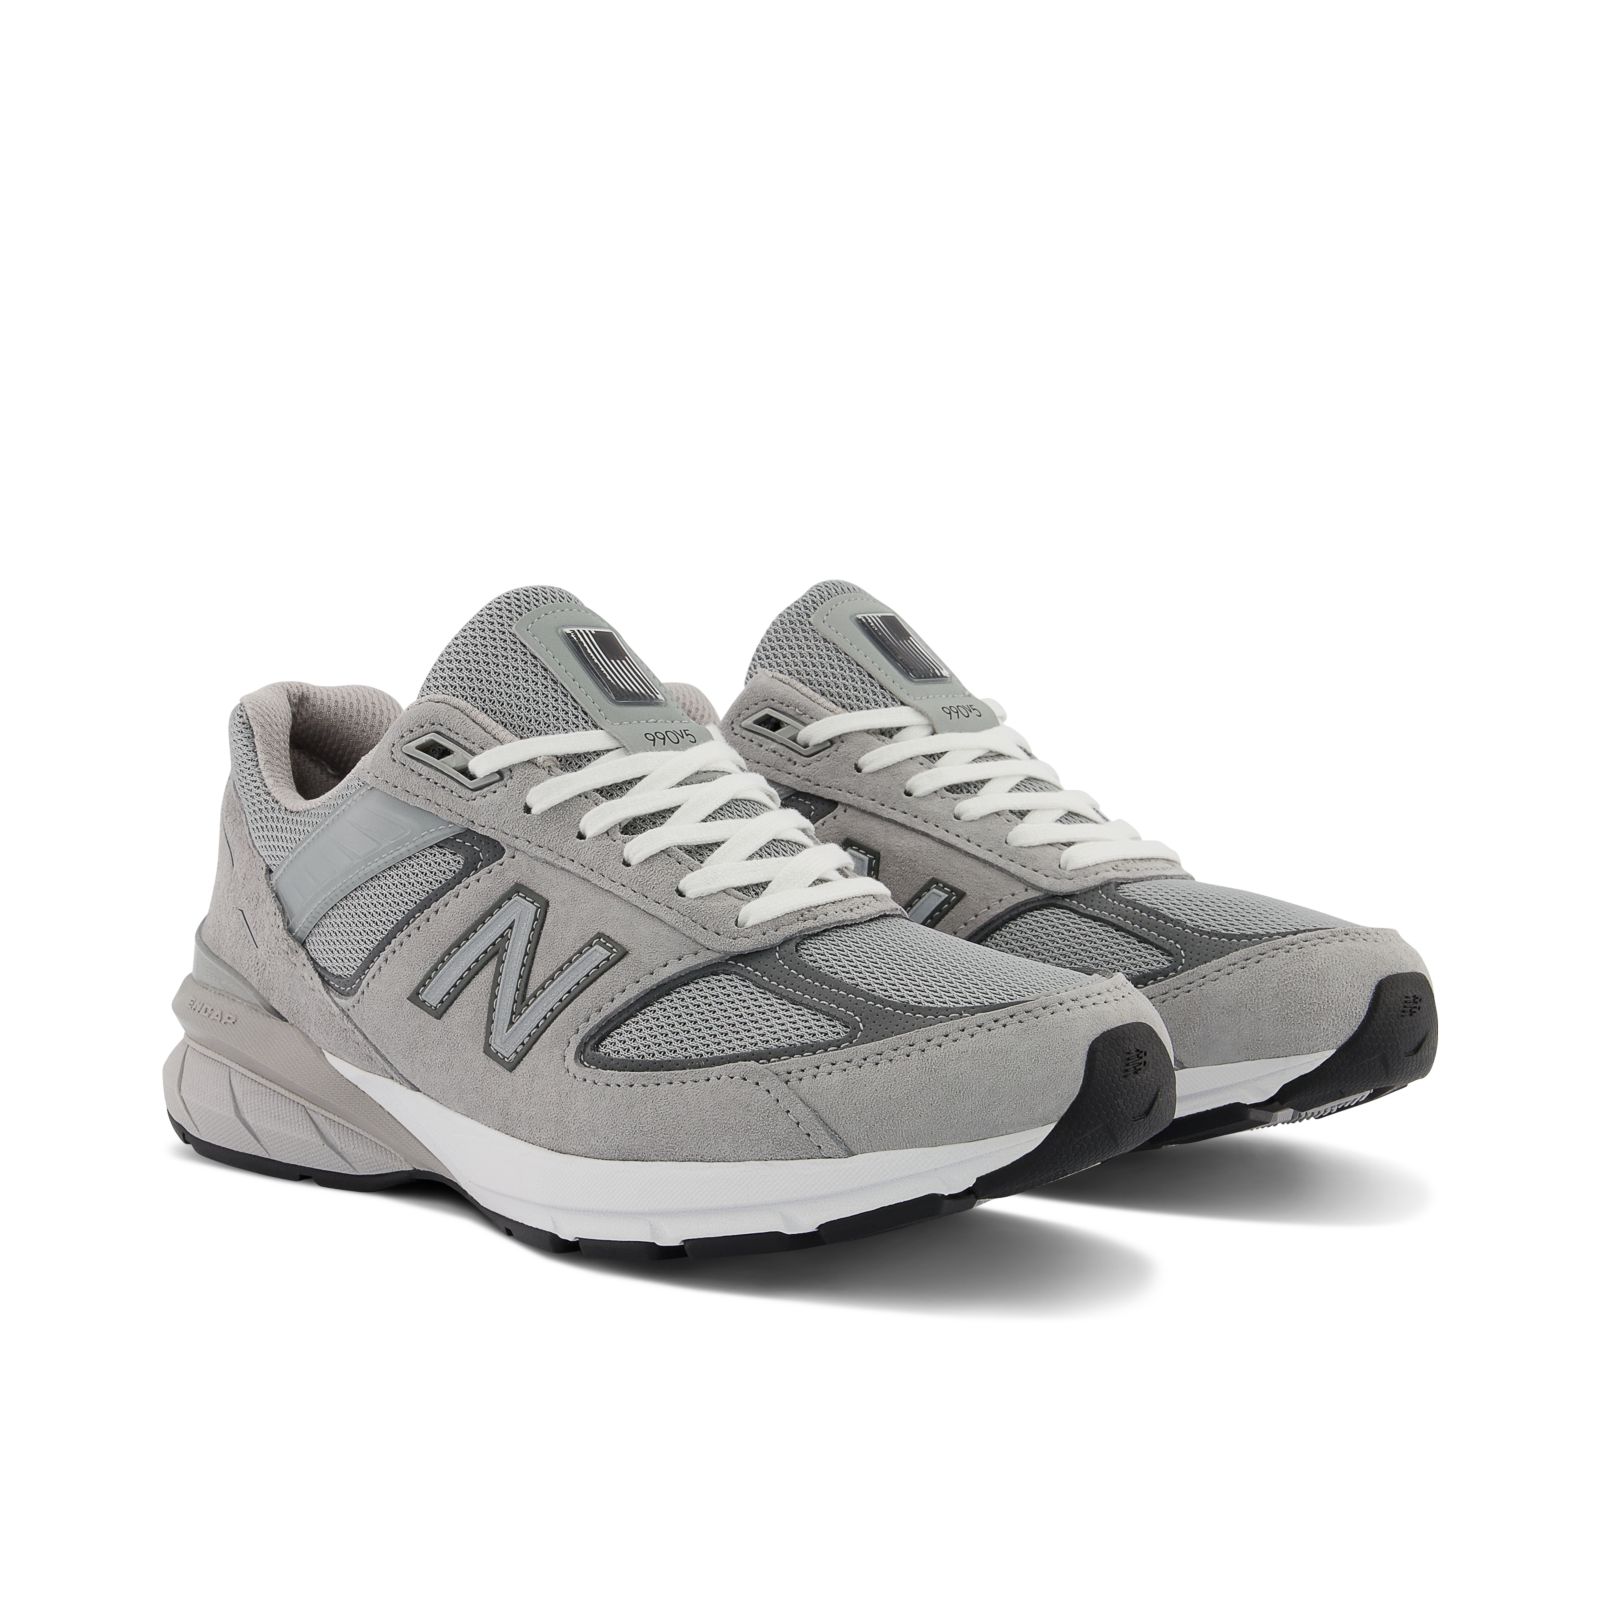 Men's MADE in USA 990v5 Core Lifestyle - New Balance